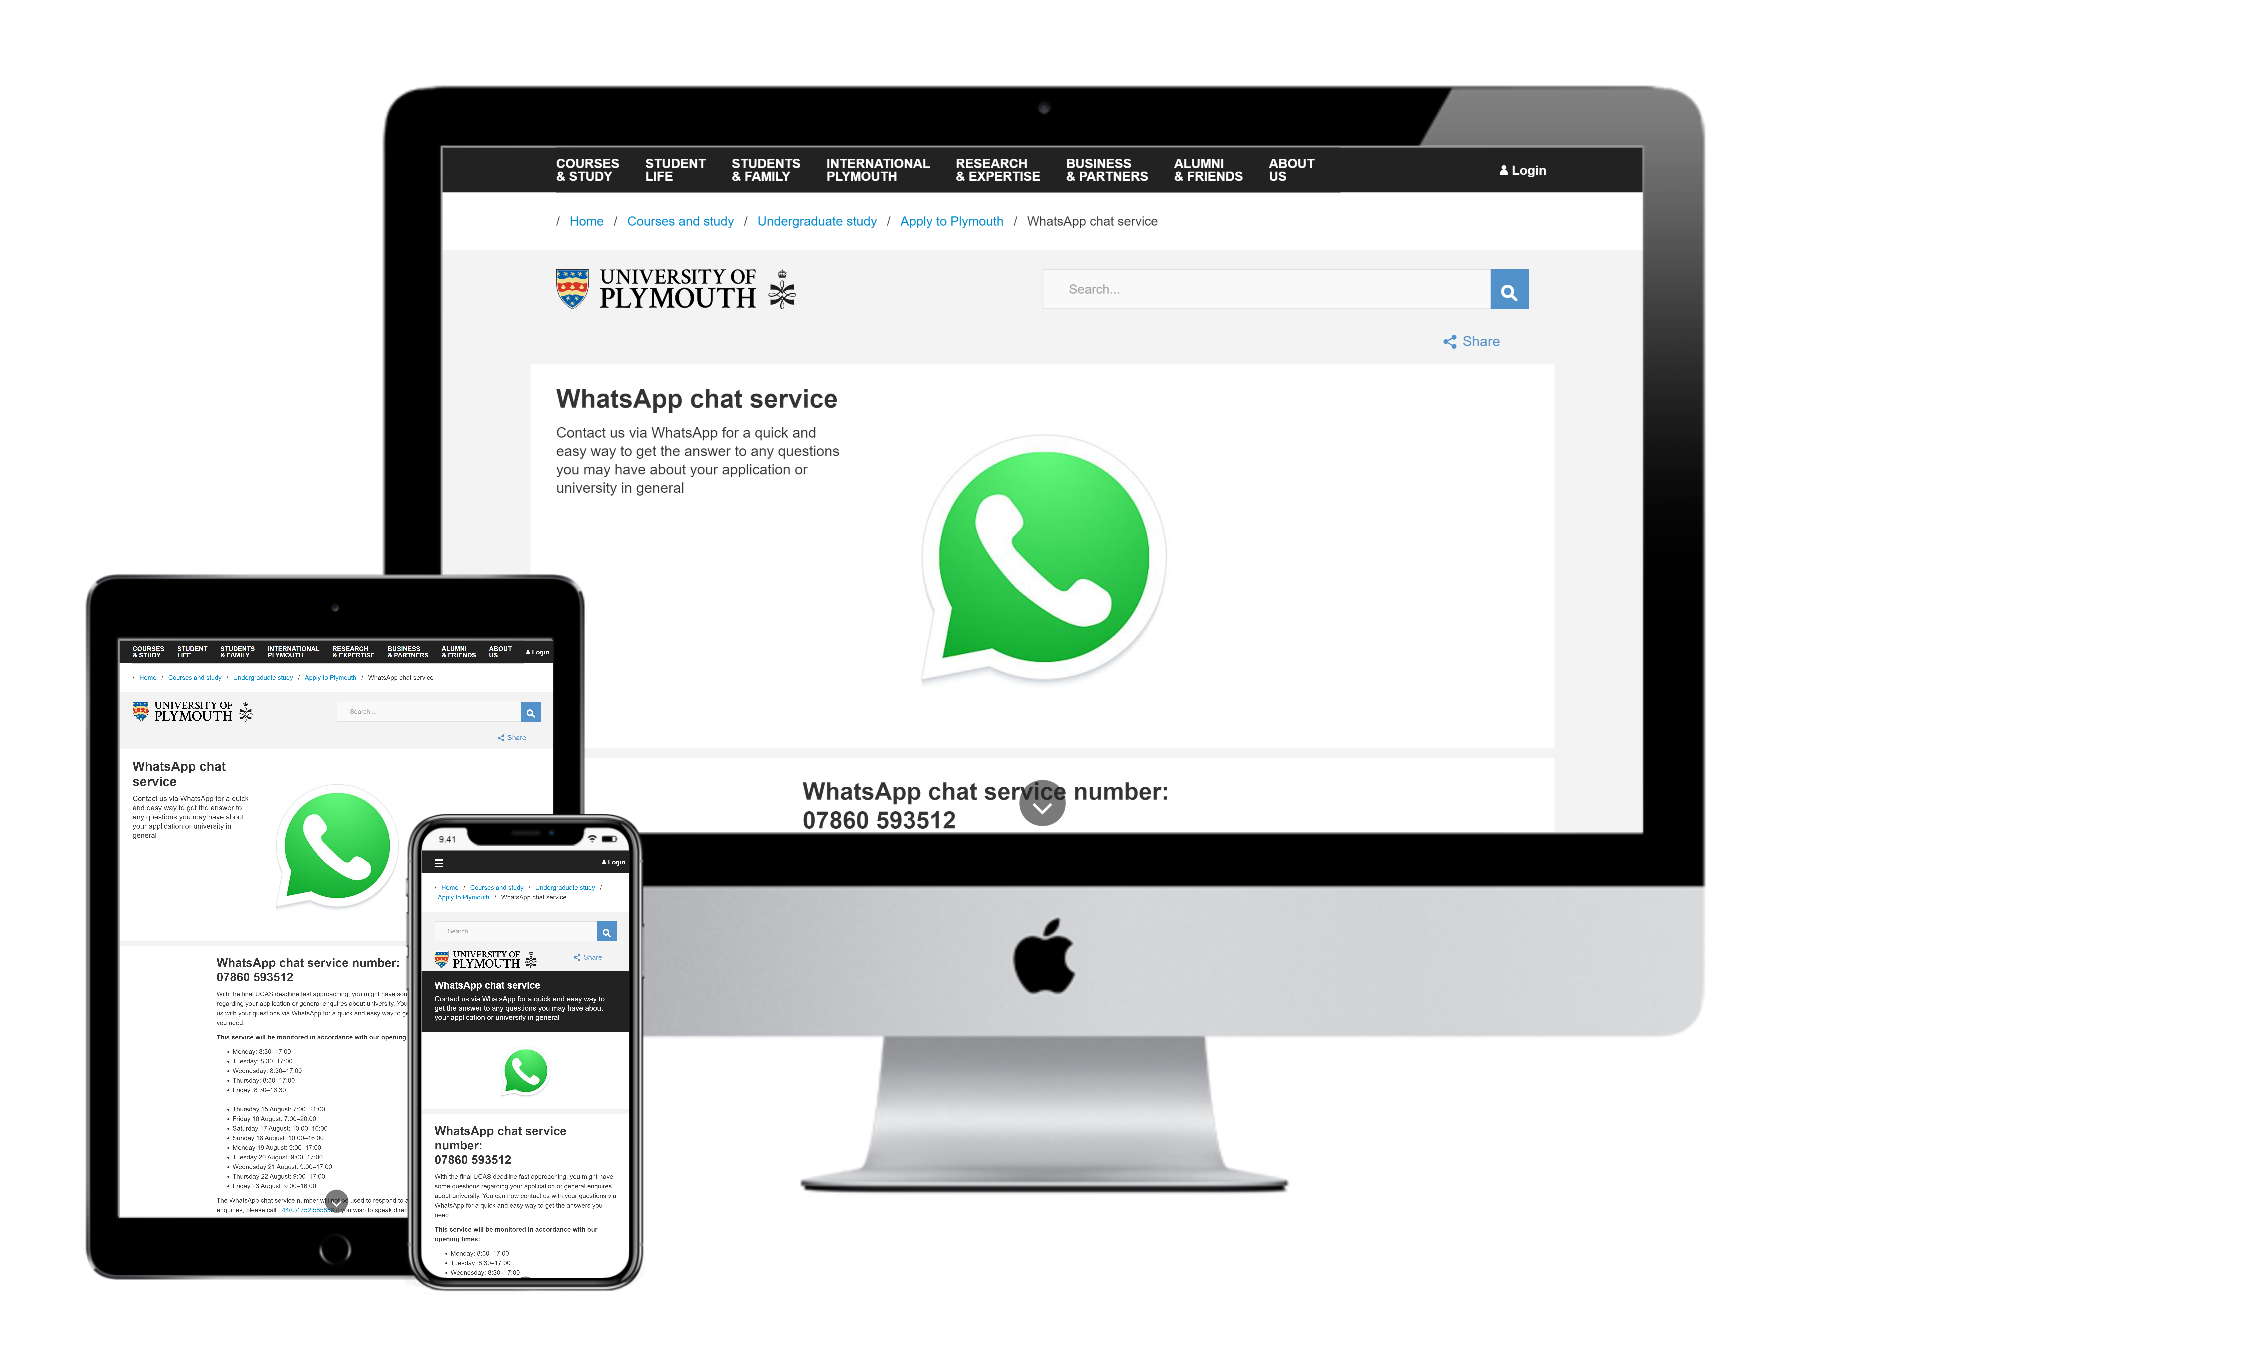 Image from the University of Plymouth website describing how they use whatsapp